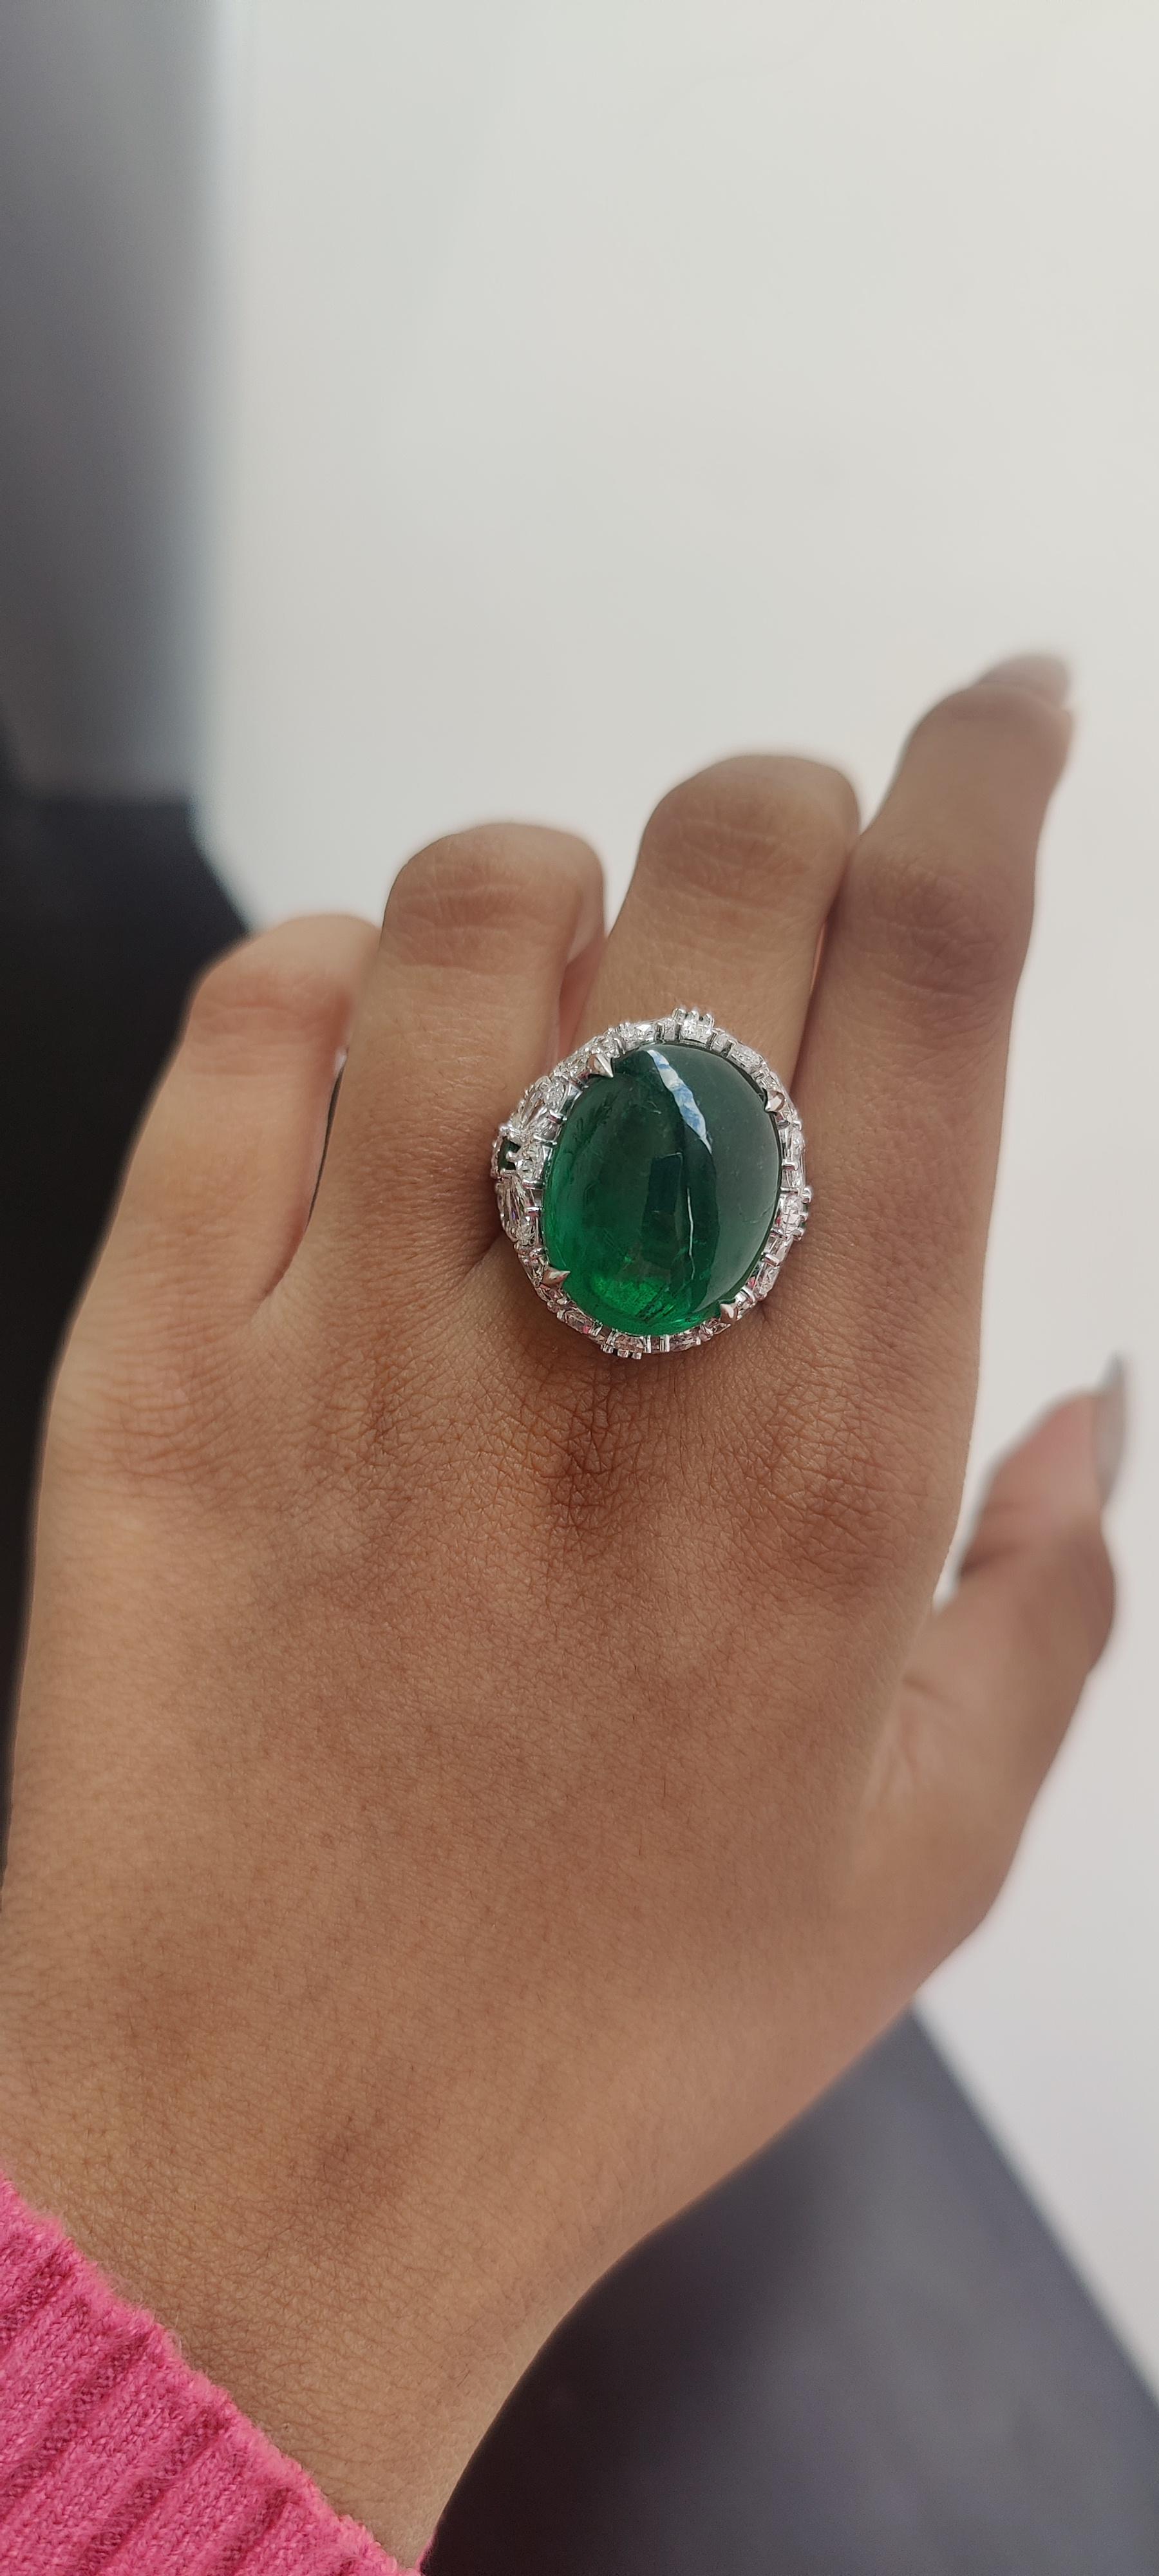 24.60 Carat Cabochon Emerald Art Deco Inspired One-of-a-kind Statement Ring For Sale 7